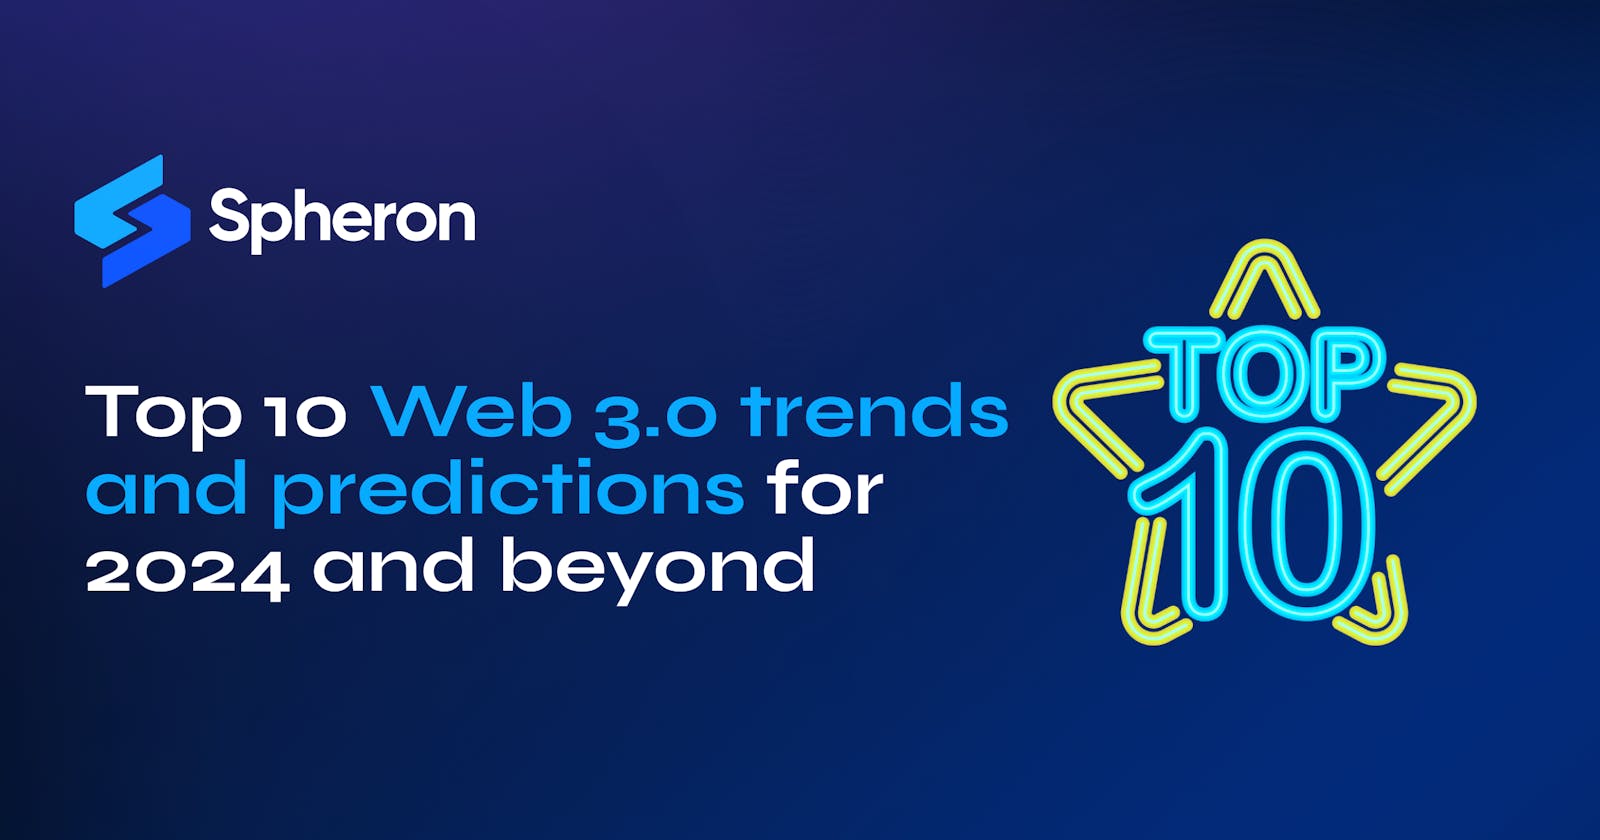 Top 10 Web 3.0 trends and predictions for 2024 and beyond